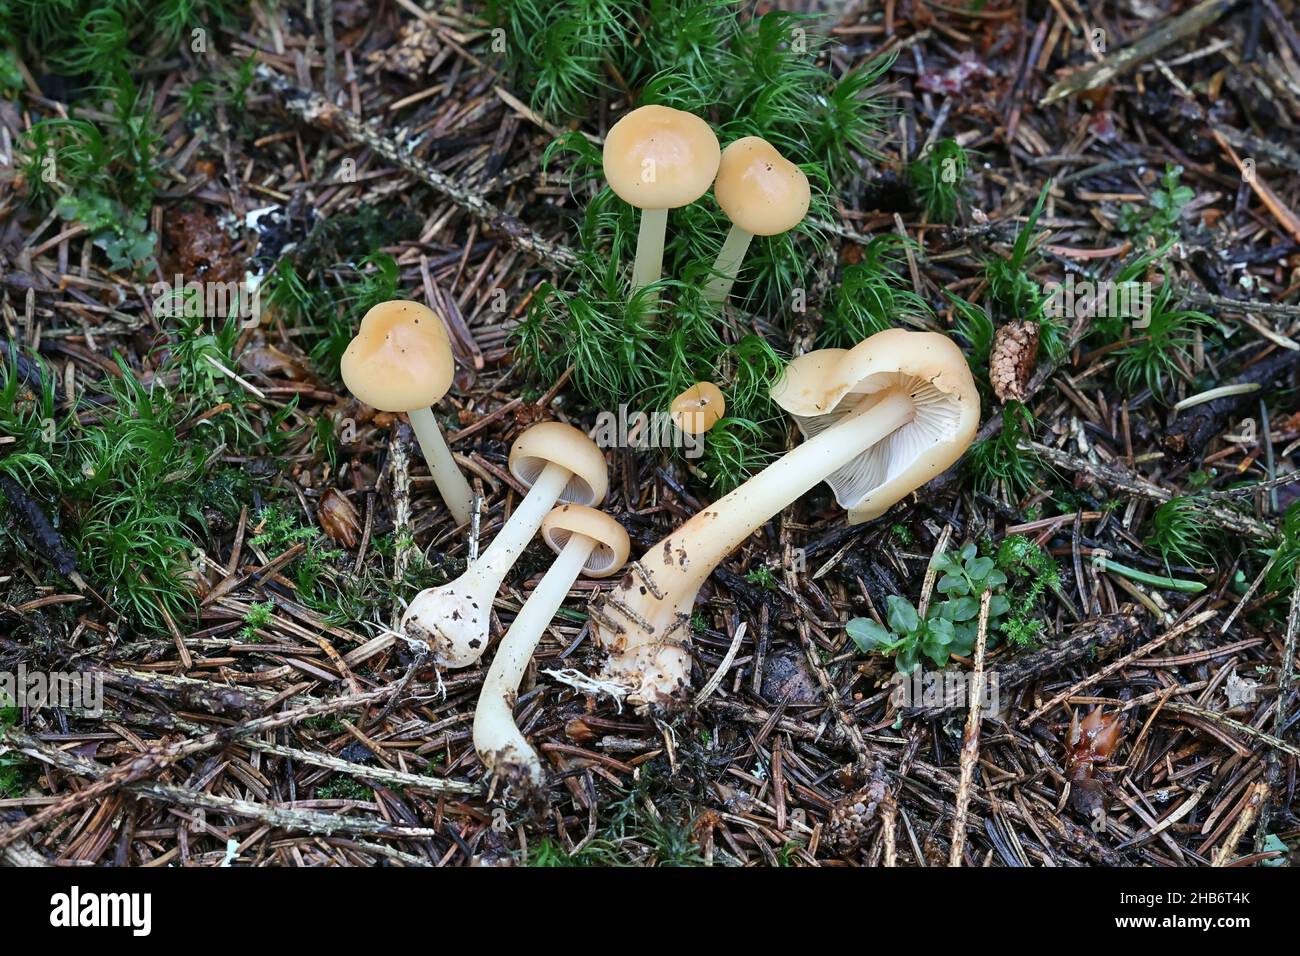 Gymnopus aquosus, also called Collybia aquosa, commonly known as watery toughshank, wild mushroom from Finland Stock Photo